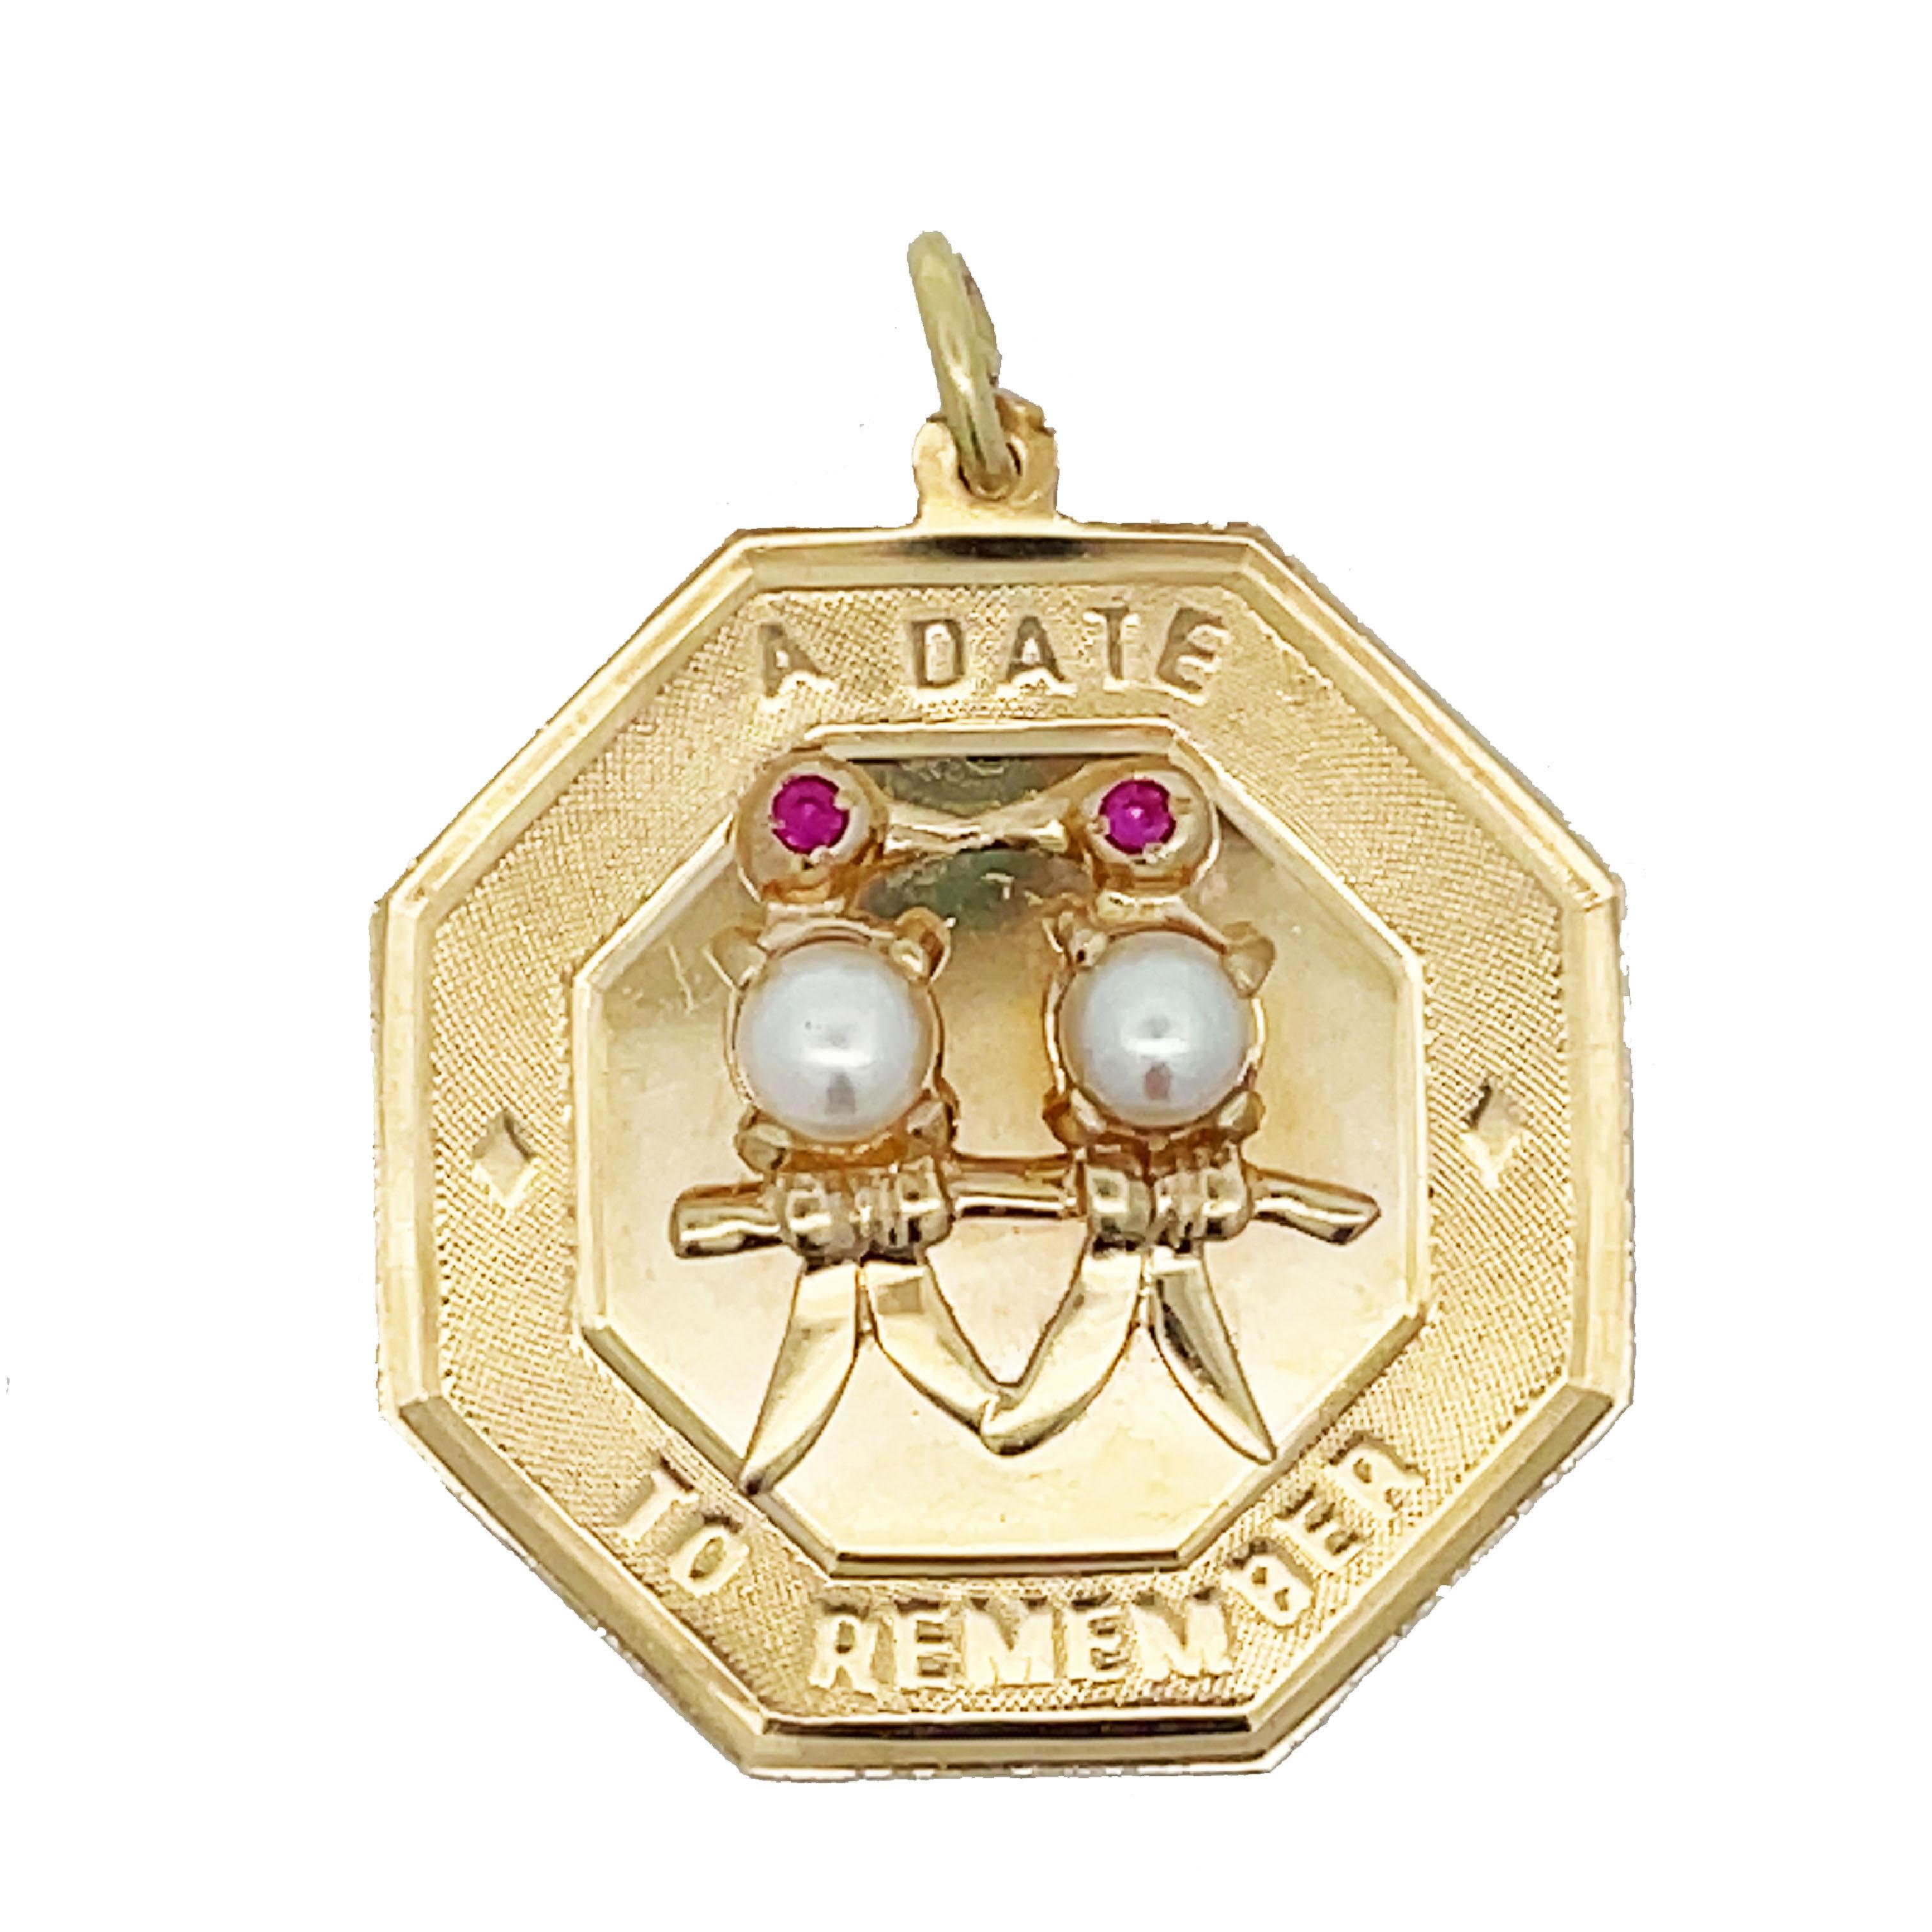 This is a wonderful 1950s pendant adorned with pearls and rubies crafted in 14K yellow gold inscribed with 